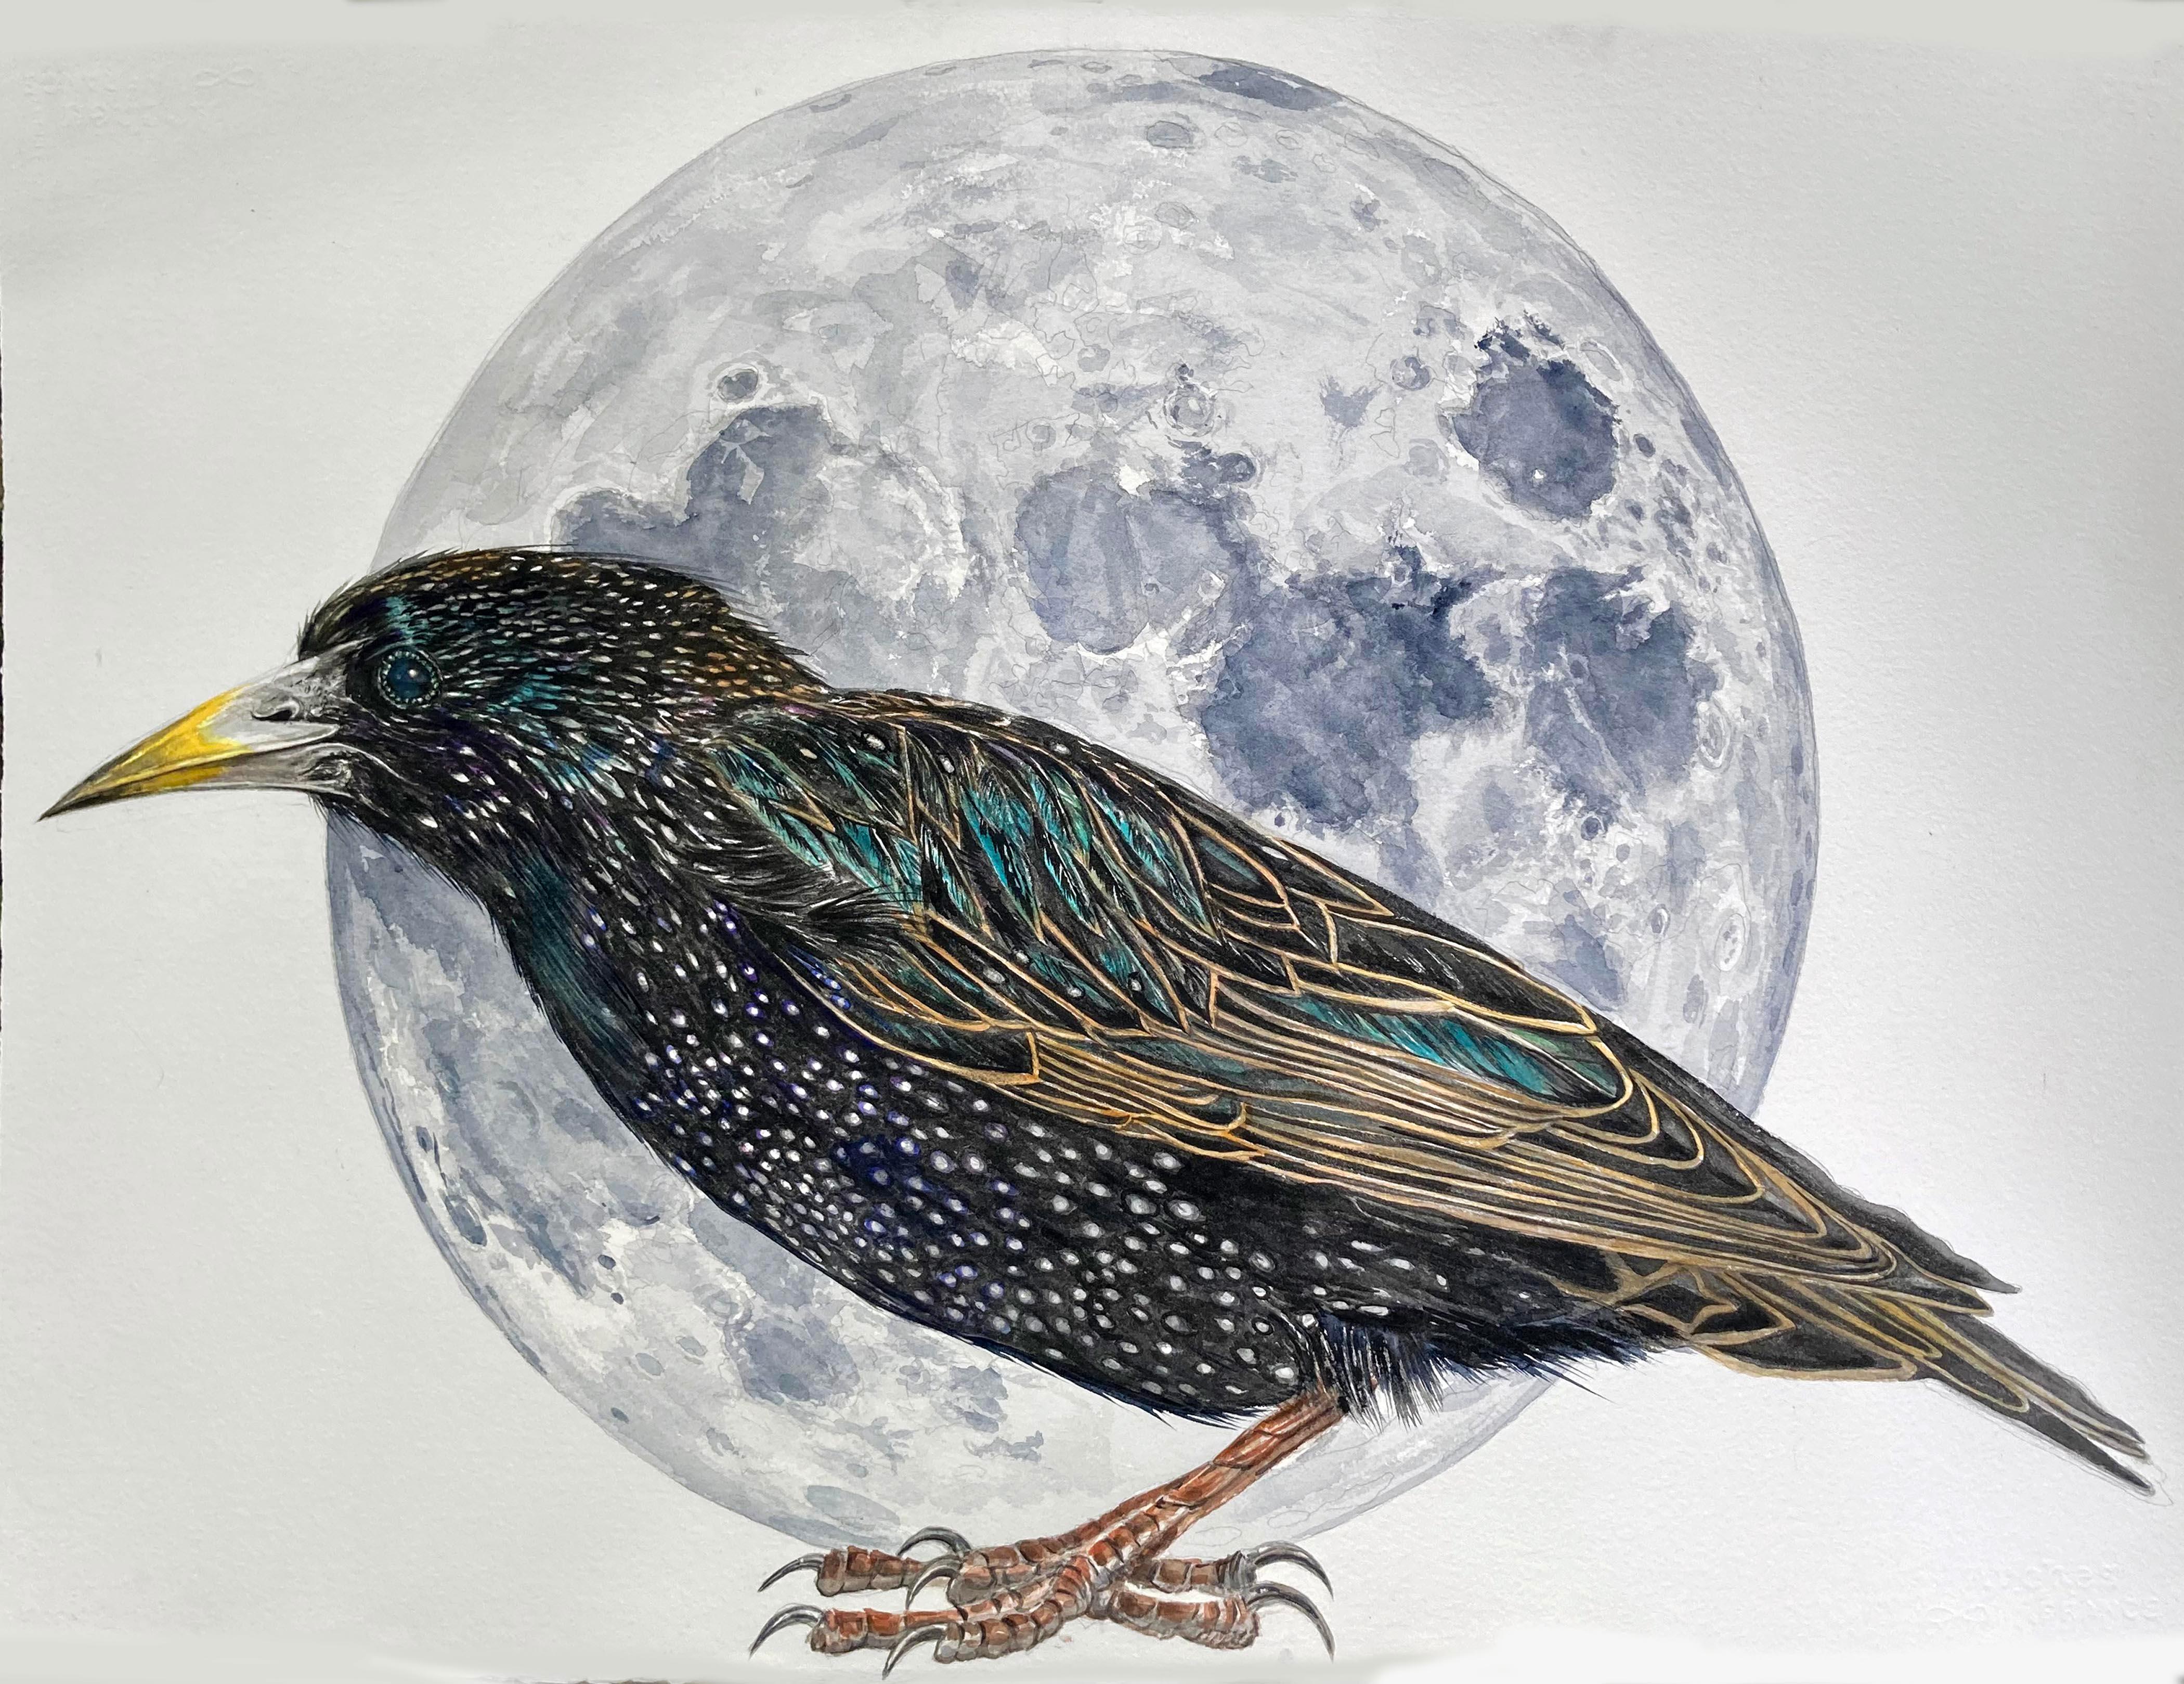 Thomas Broadbent Animal Painting - "Moon and Stars" Contemporary Surrealist painting (starling bird with moon)